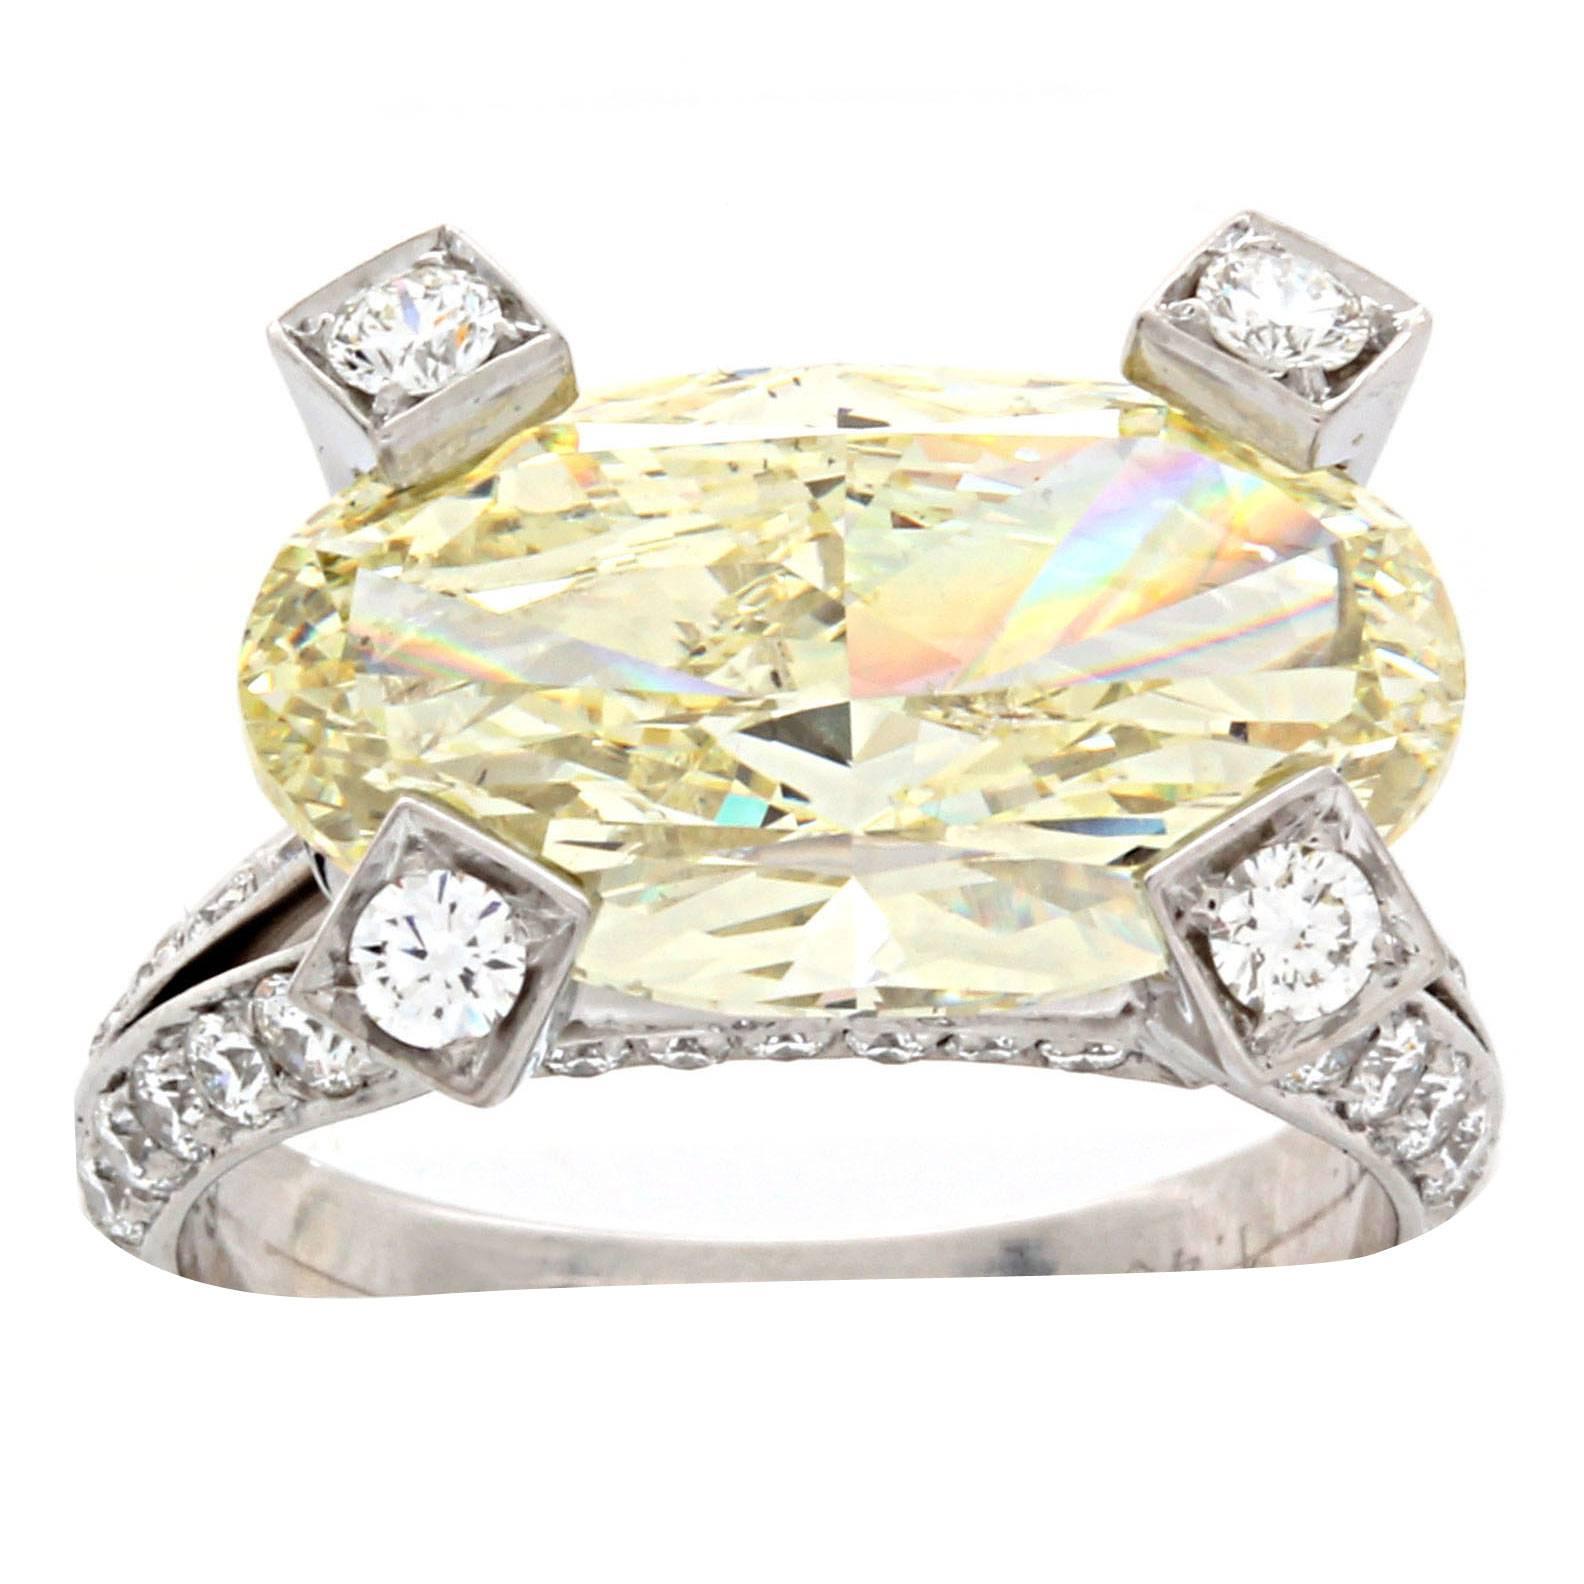 5.66 Carat GIA Certified Fancy Yellow Diamond Platinum Ring For Sale